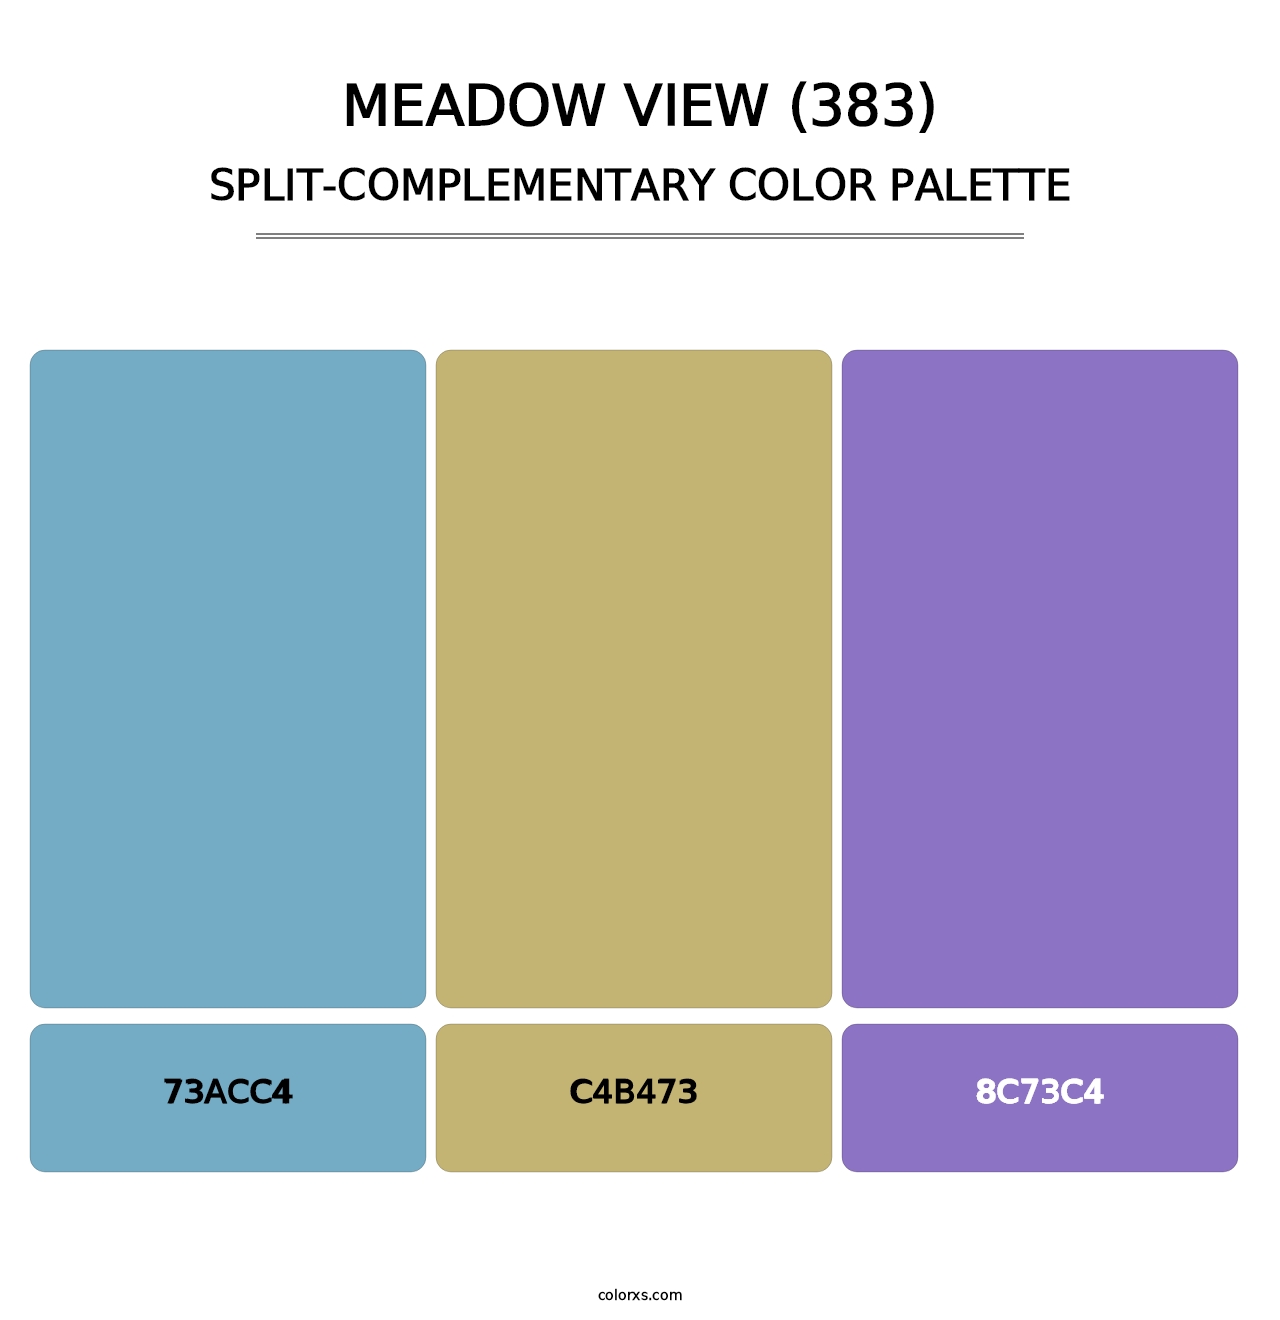 Meadow View (383) - Split-Complementary Color Palette